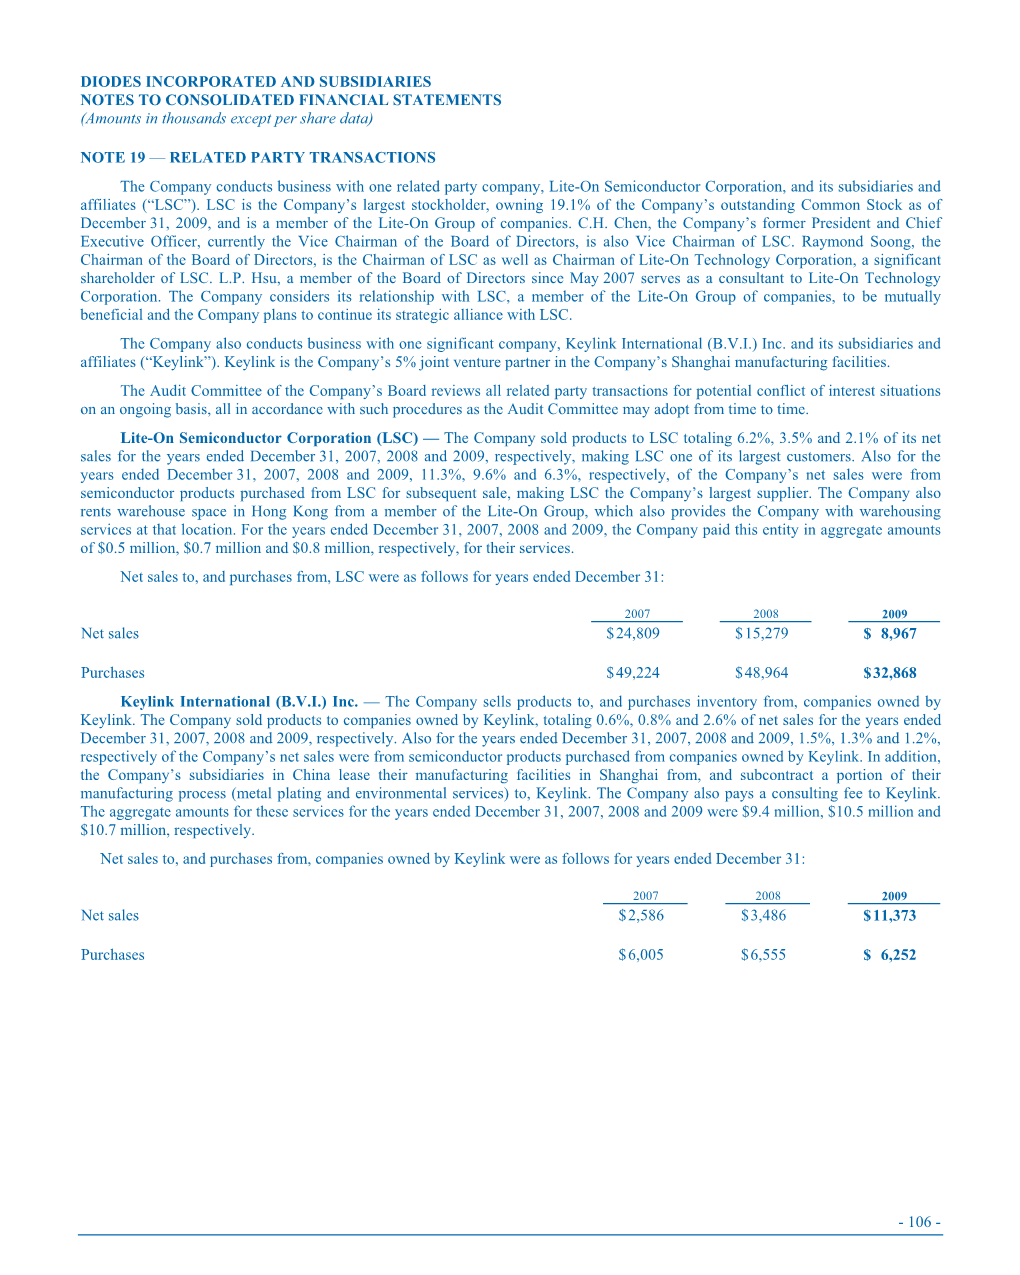 DIODES INCORPORATED and SUBSIDIARIES NOTES to CONSOLIDATED FINANCIAL STATEMENTS (Amounts in Thousands Except Per Share Data)